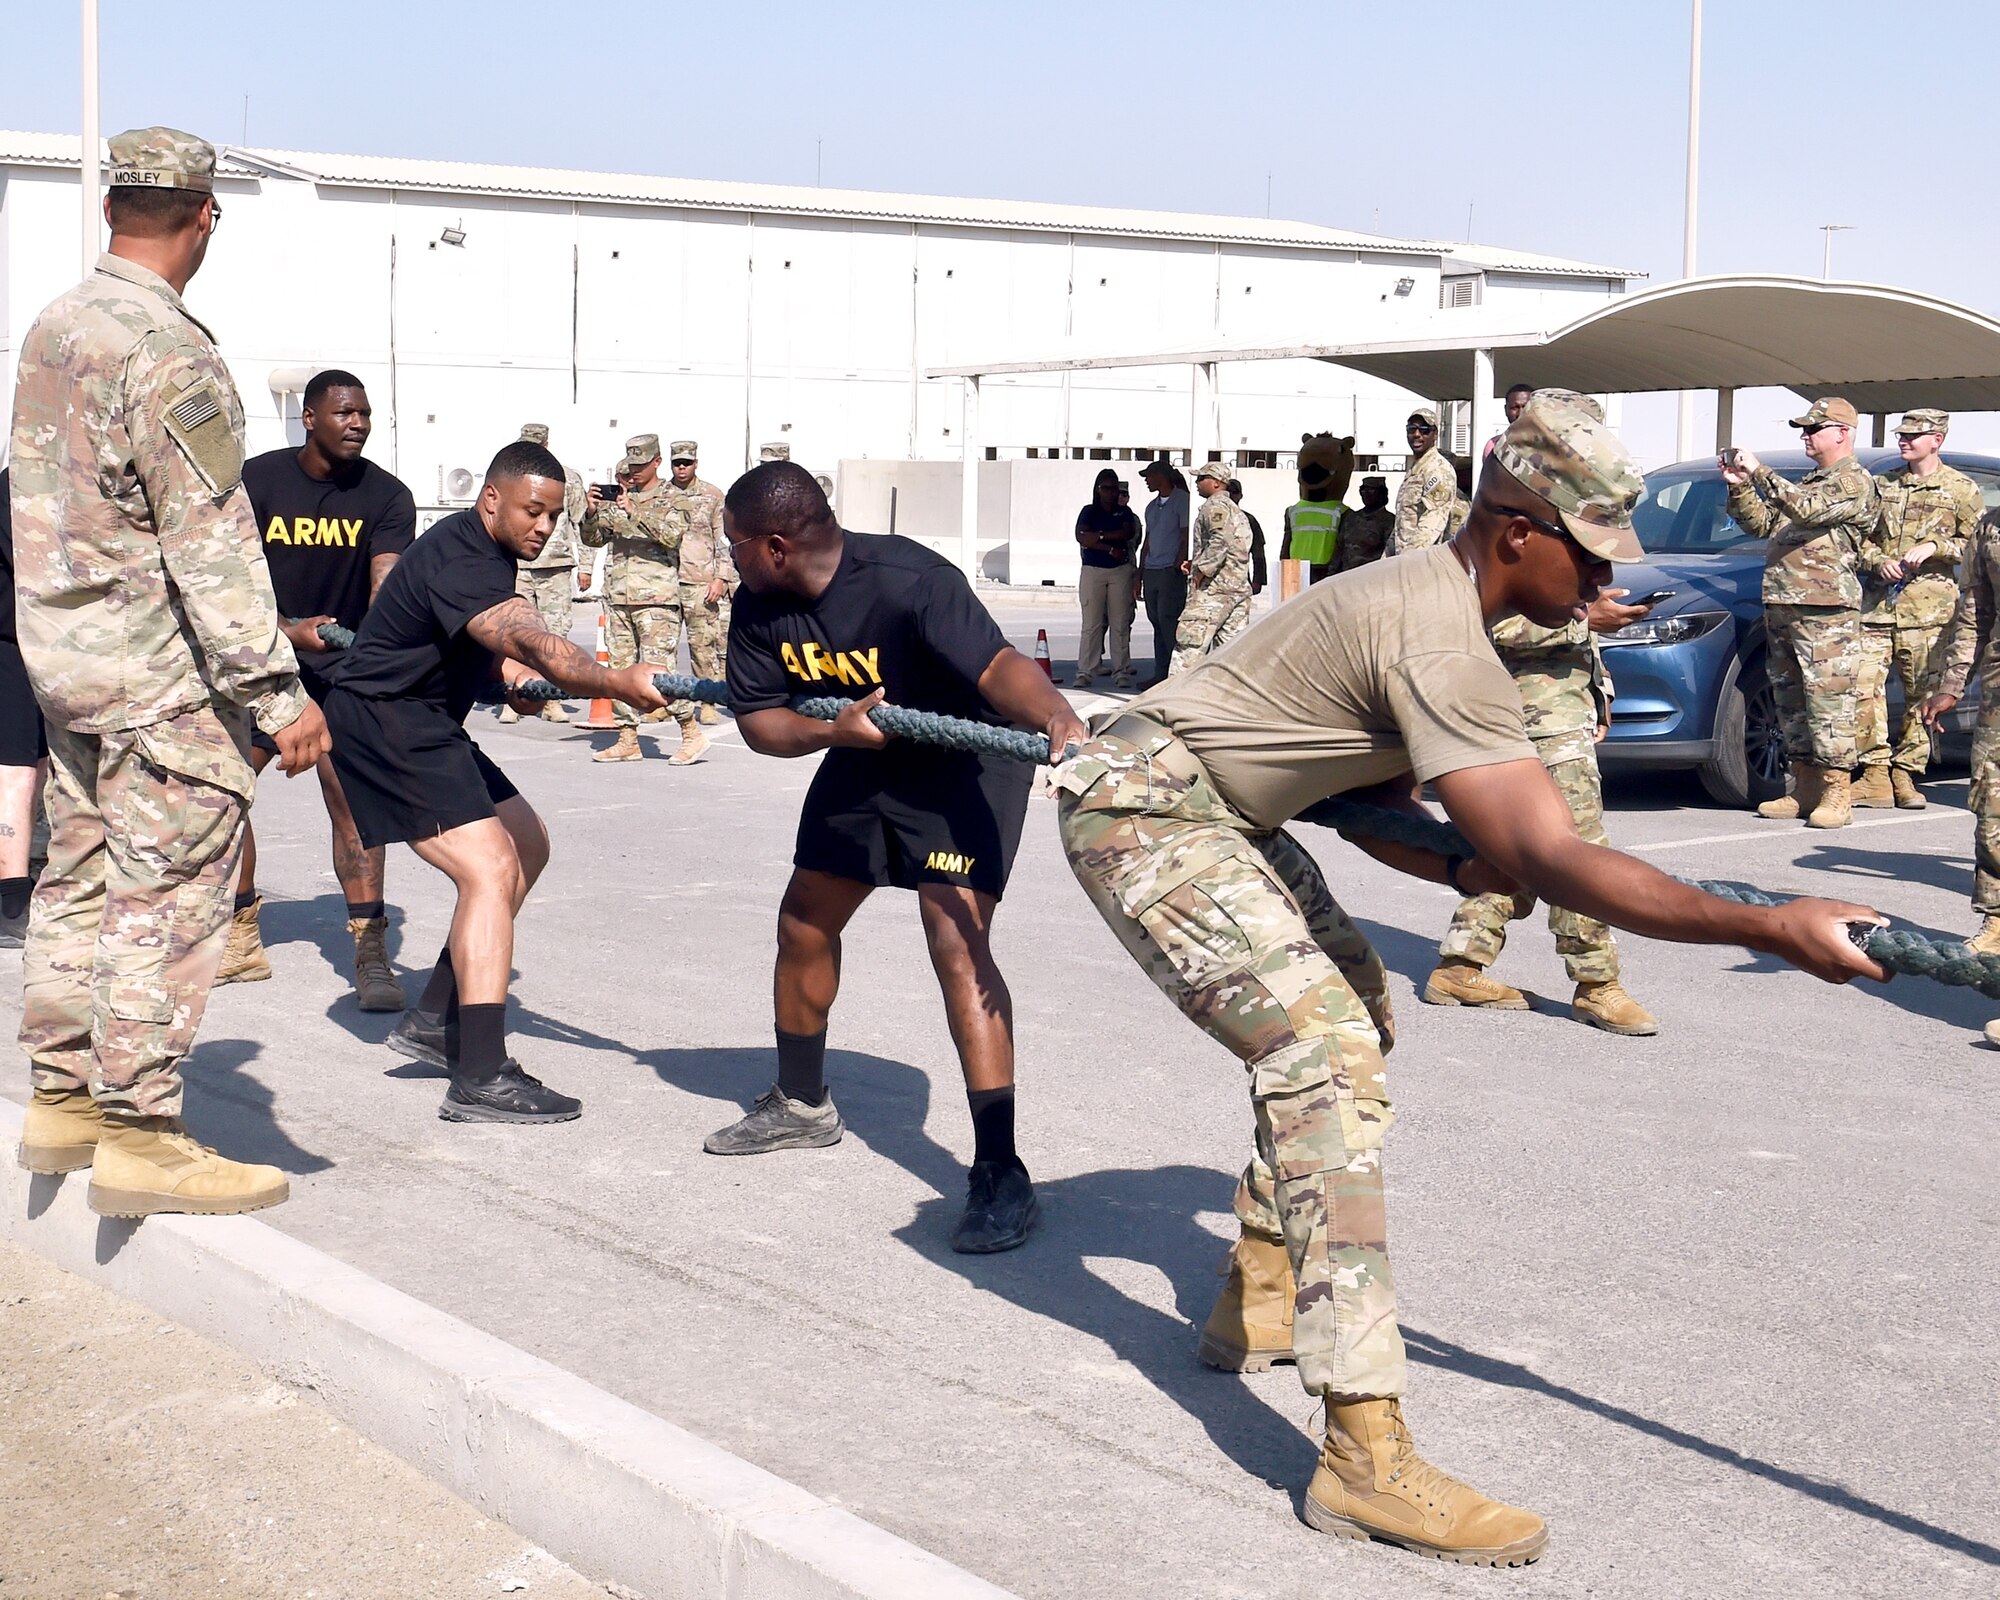 Members of the 1st Battalion, 44th Air Defense Artillery Regiment, Fort Hood, Texas, compete in a truck-pulling competition here on Nov. 11, 2021 in commemoration of Veterans Day. The event, "Pull Together for Veterans," brought the U.S. Army and U.S. Air Force together in a friendly competition to raise awareness on veterans' sacrifices.